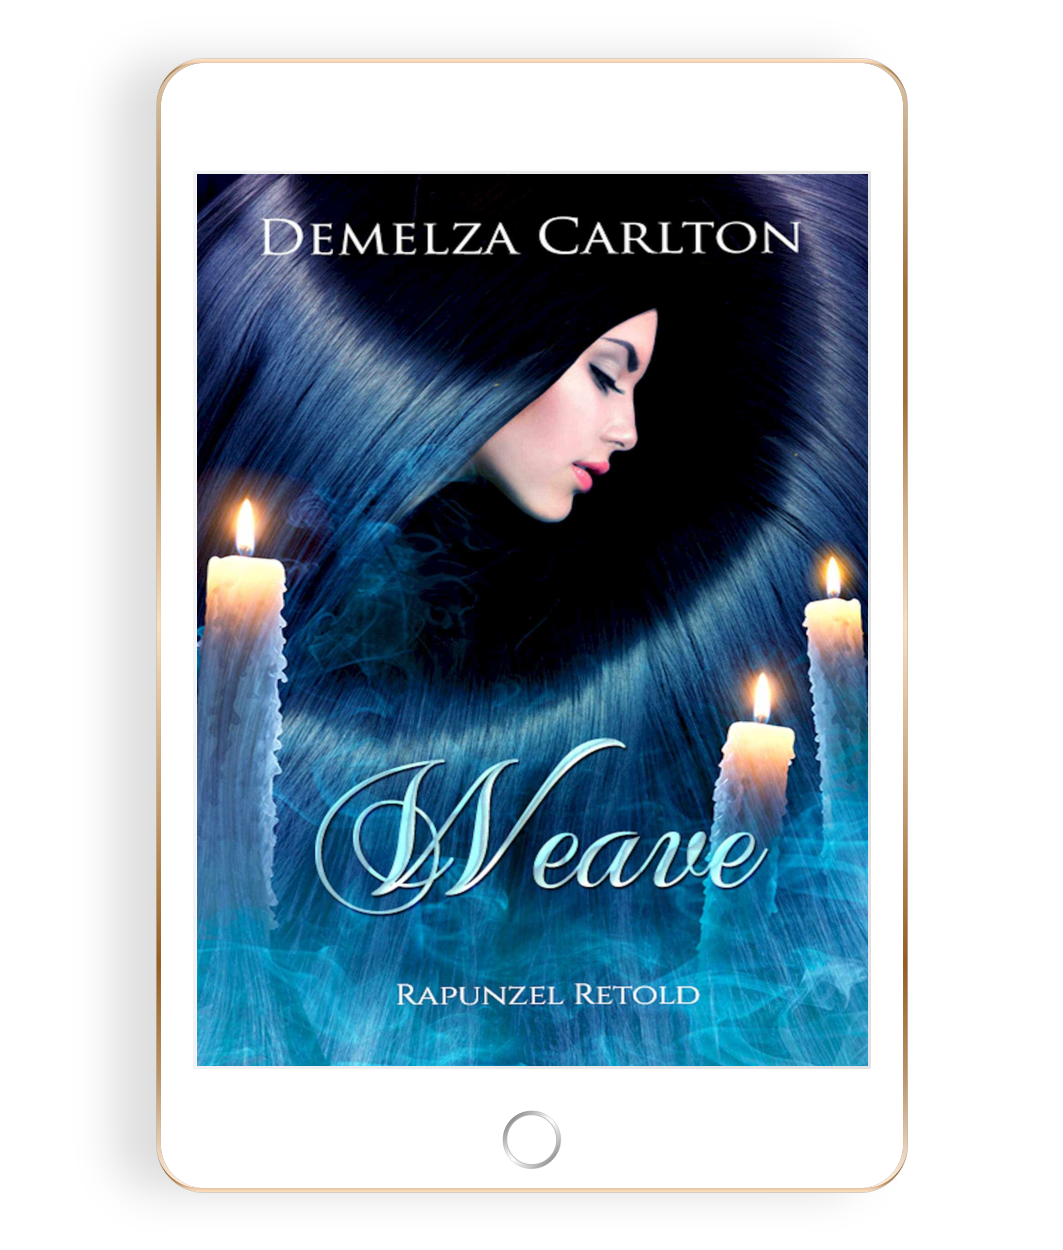 Weave: Rapunzel Retold Book 25 in the Romance a Medieval Fairytale series by USA Today Bestselling Author Demelza Carlton